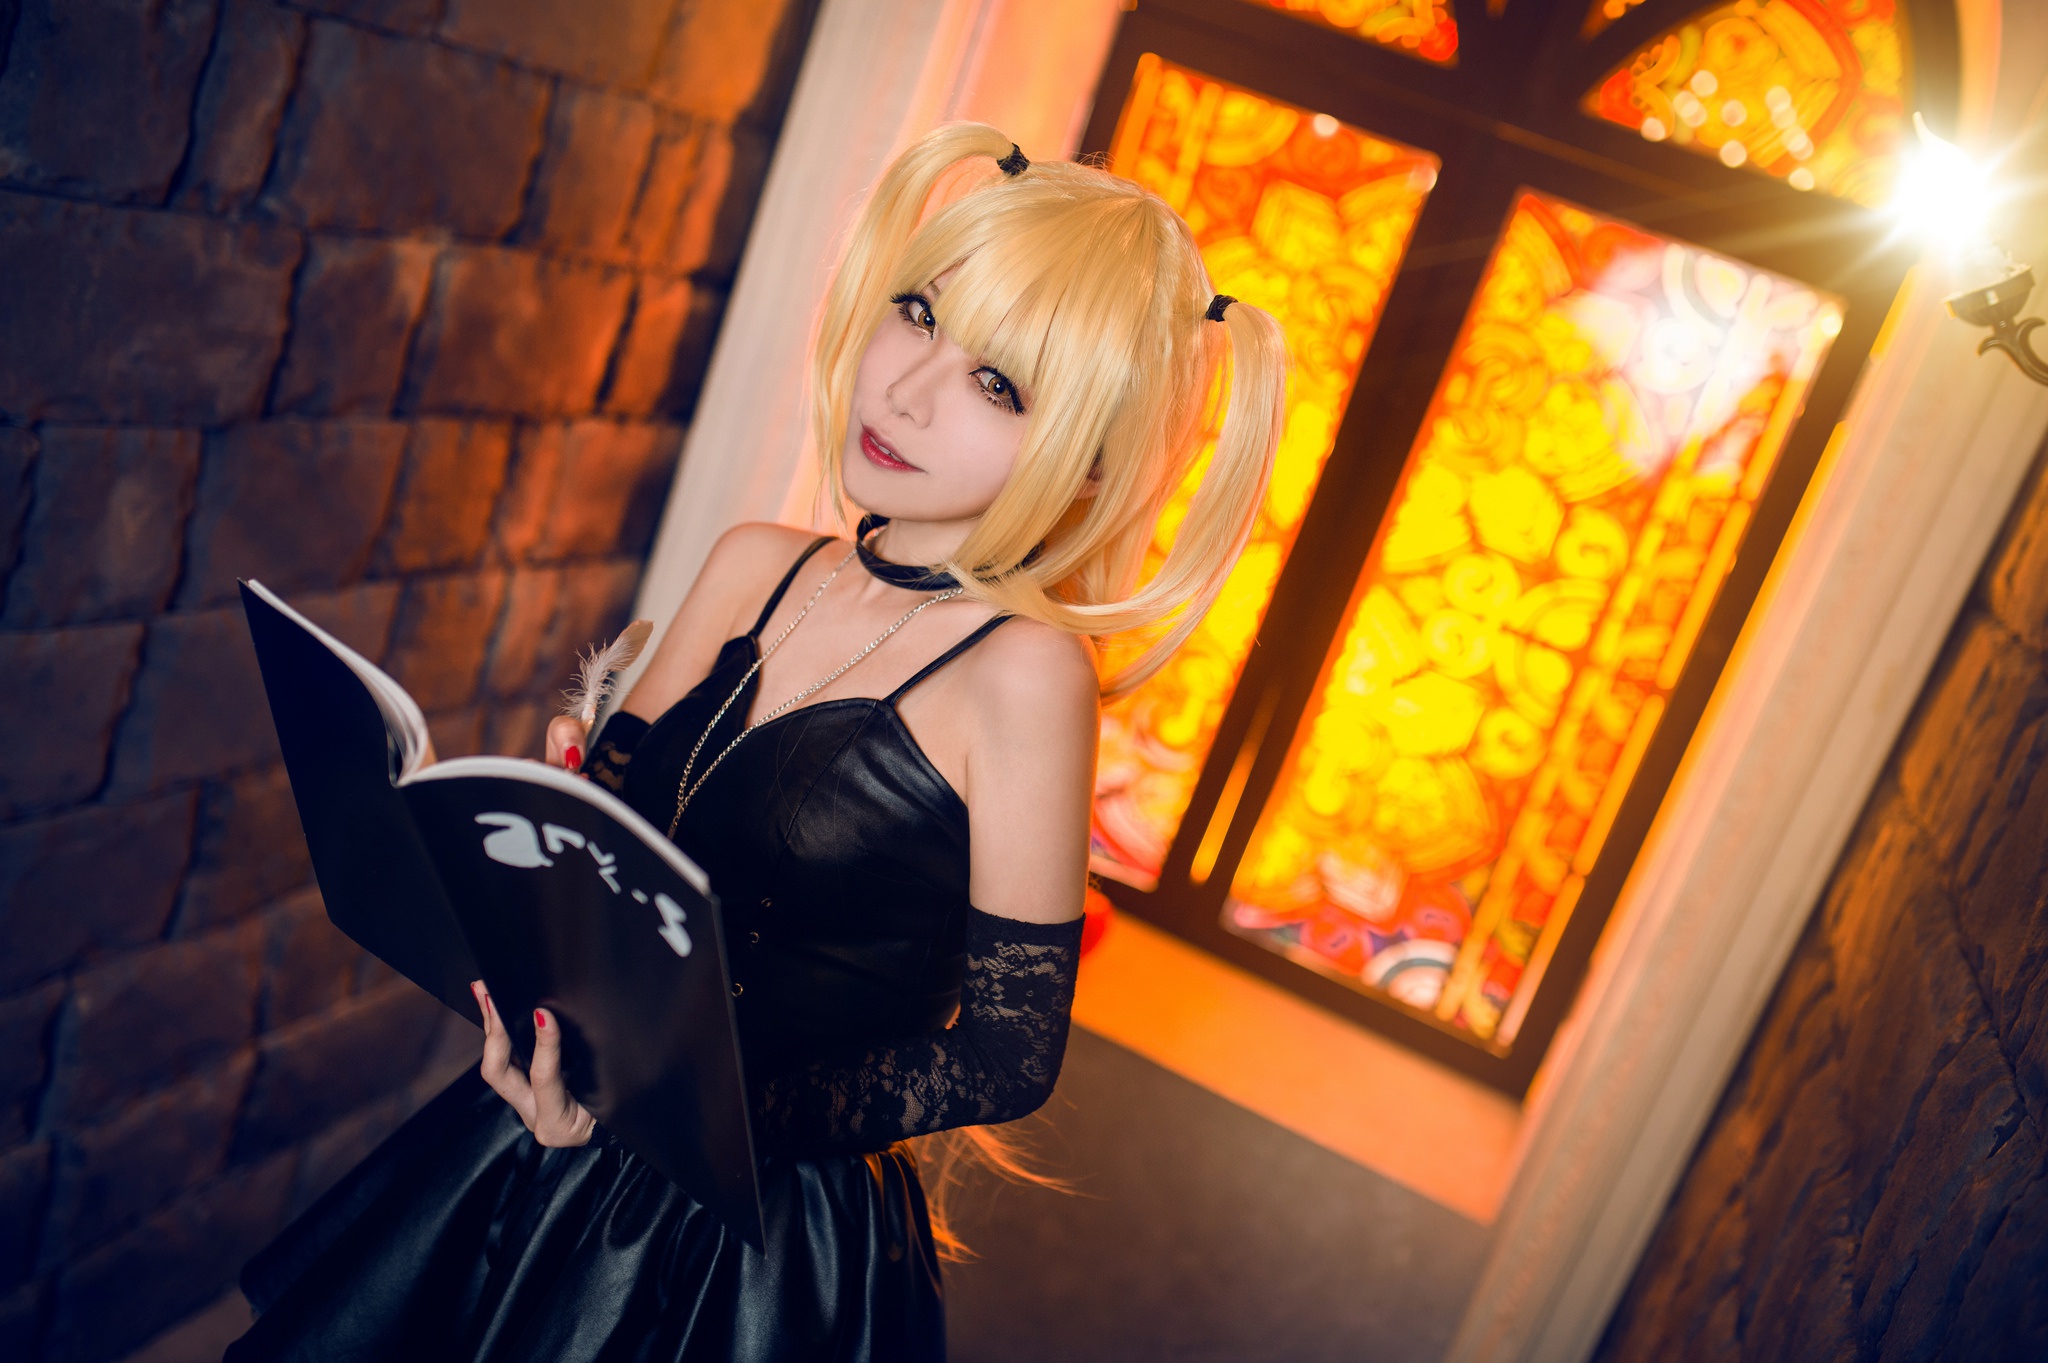 Asian Blonde Cosplay Death Note Dress Girl Model Woman 2048x1363